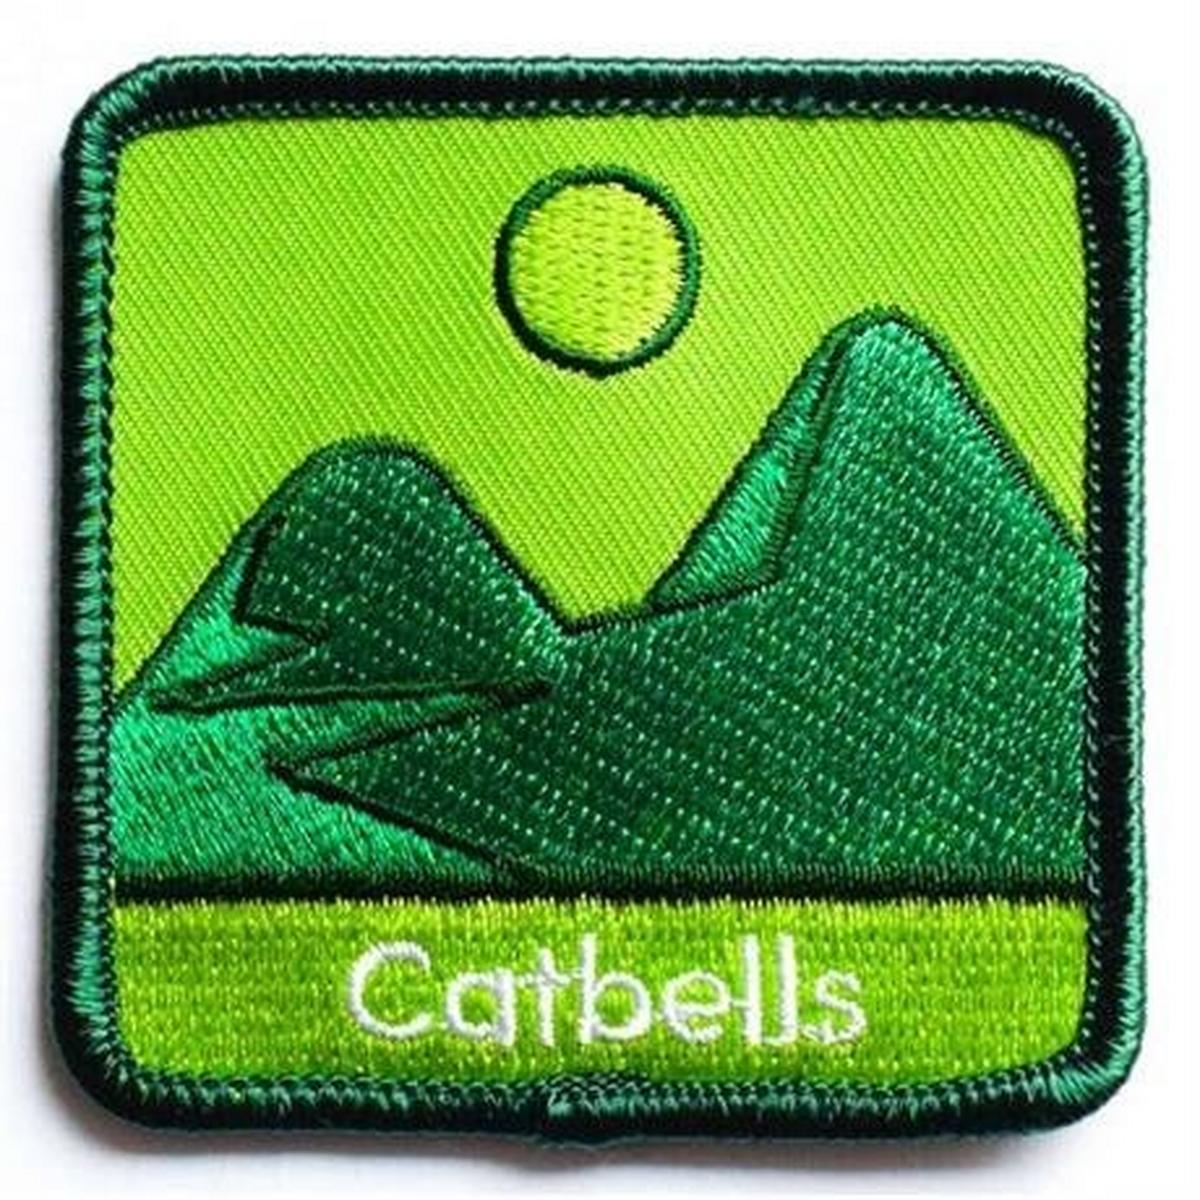 Conquer Lake District Patch - Catbells